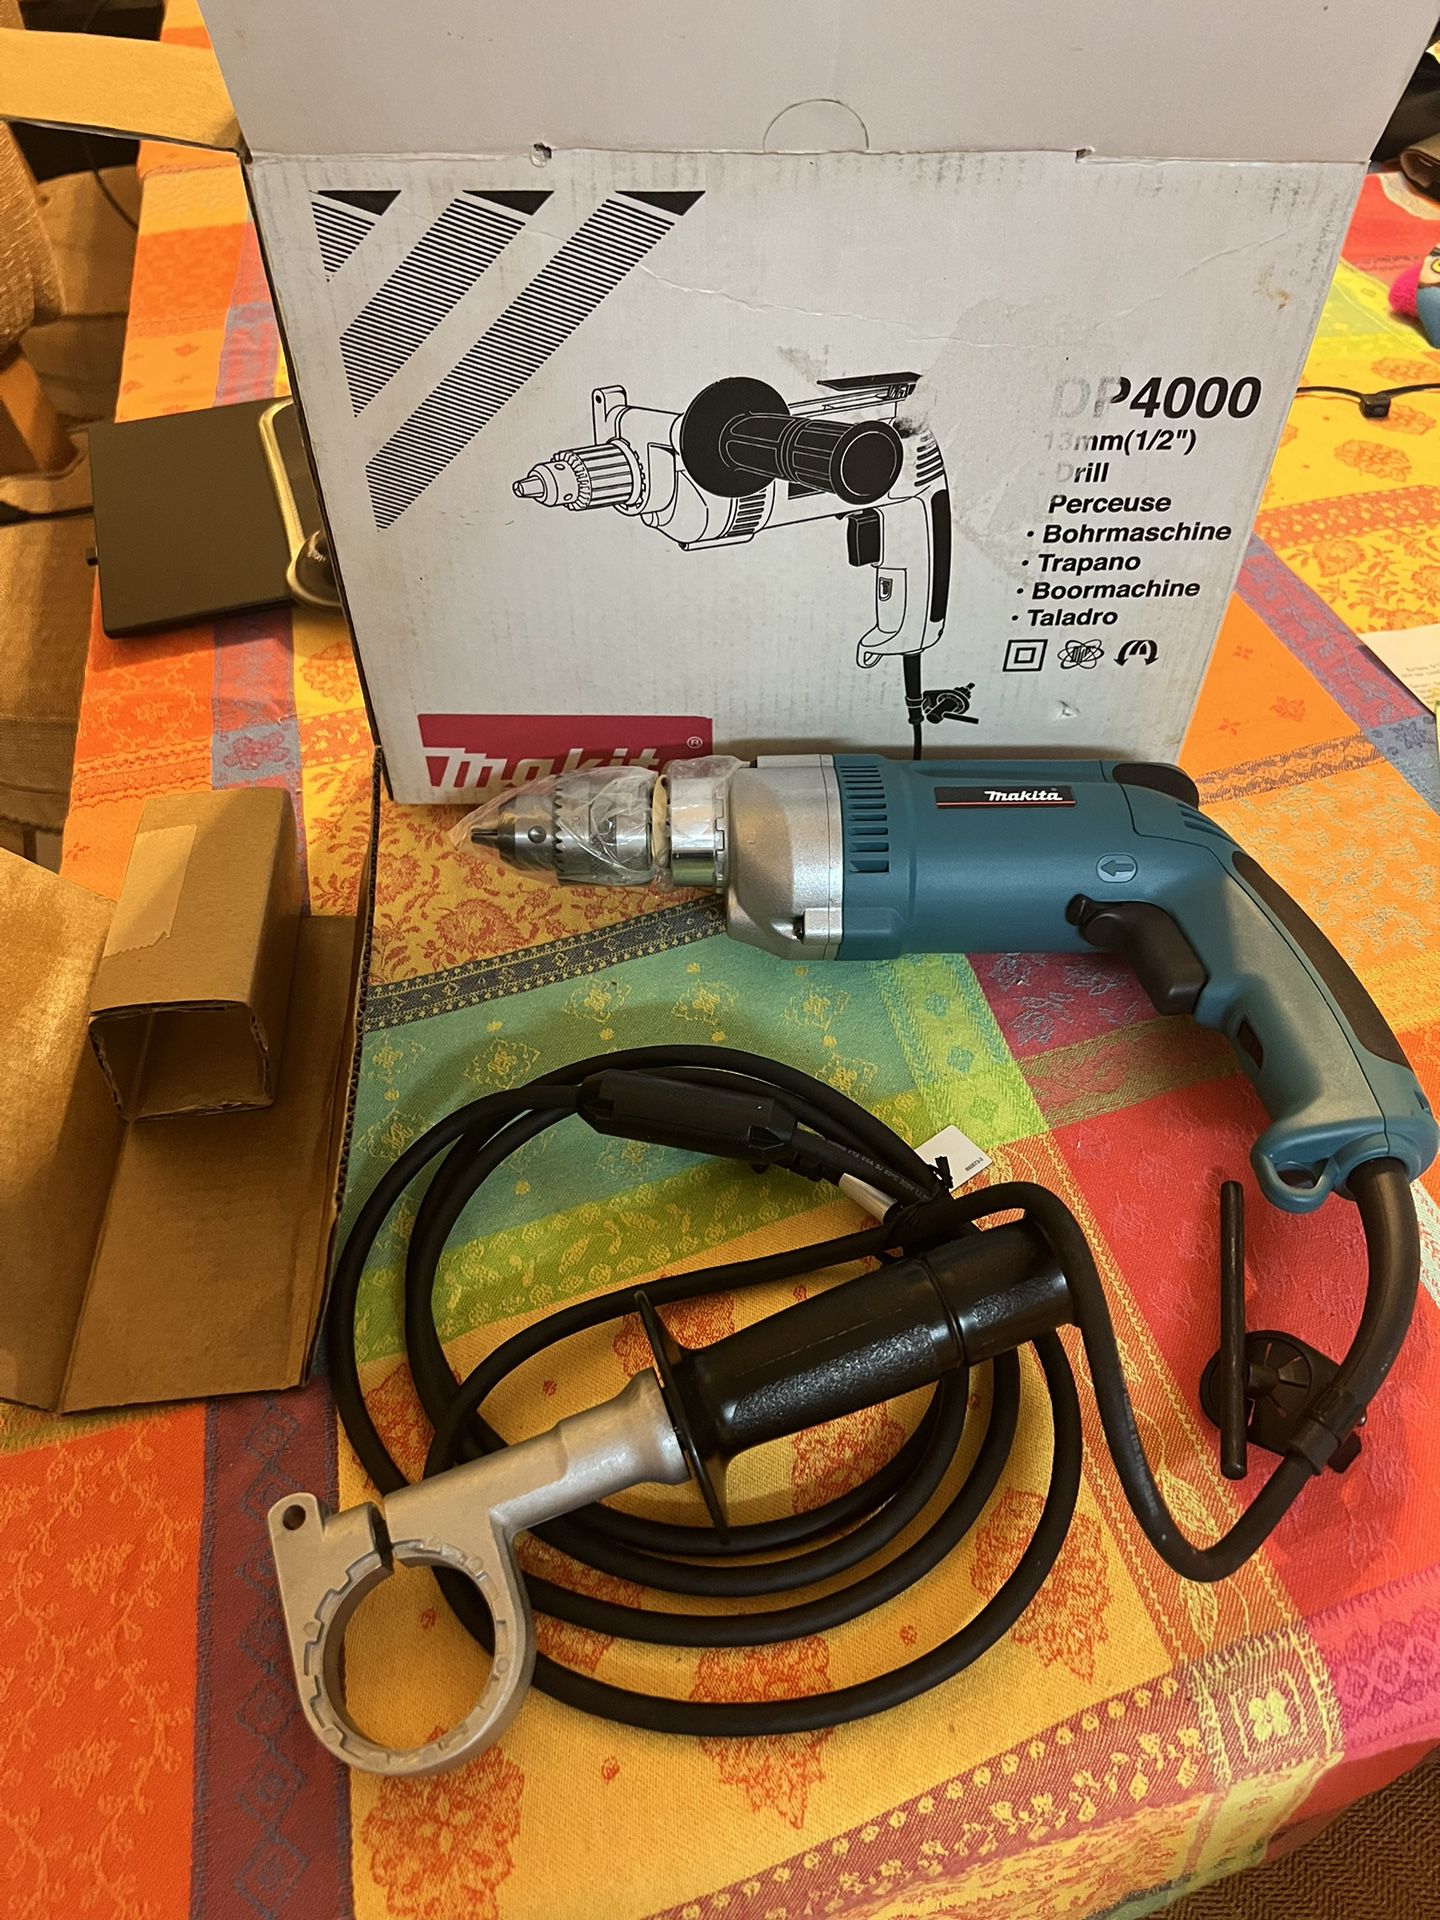 Dp 40000 13 Mm 1/2 Inch Drill MAKITA Hardly Used for Sale in Delray Beach,  FL OfferUp